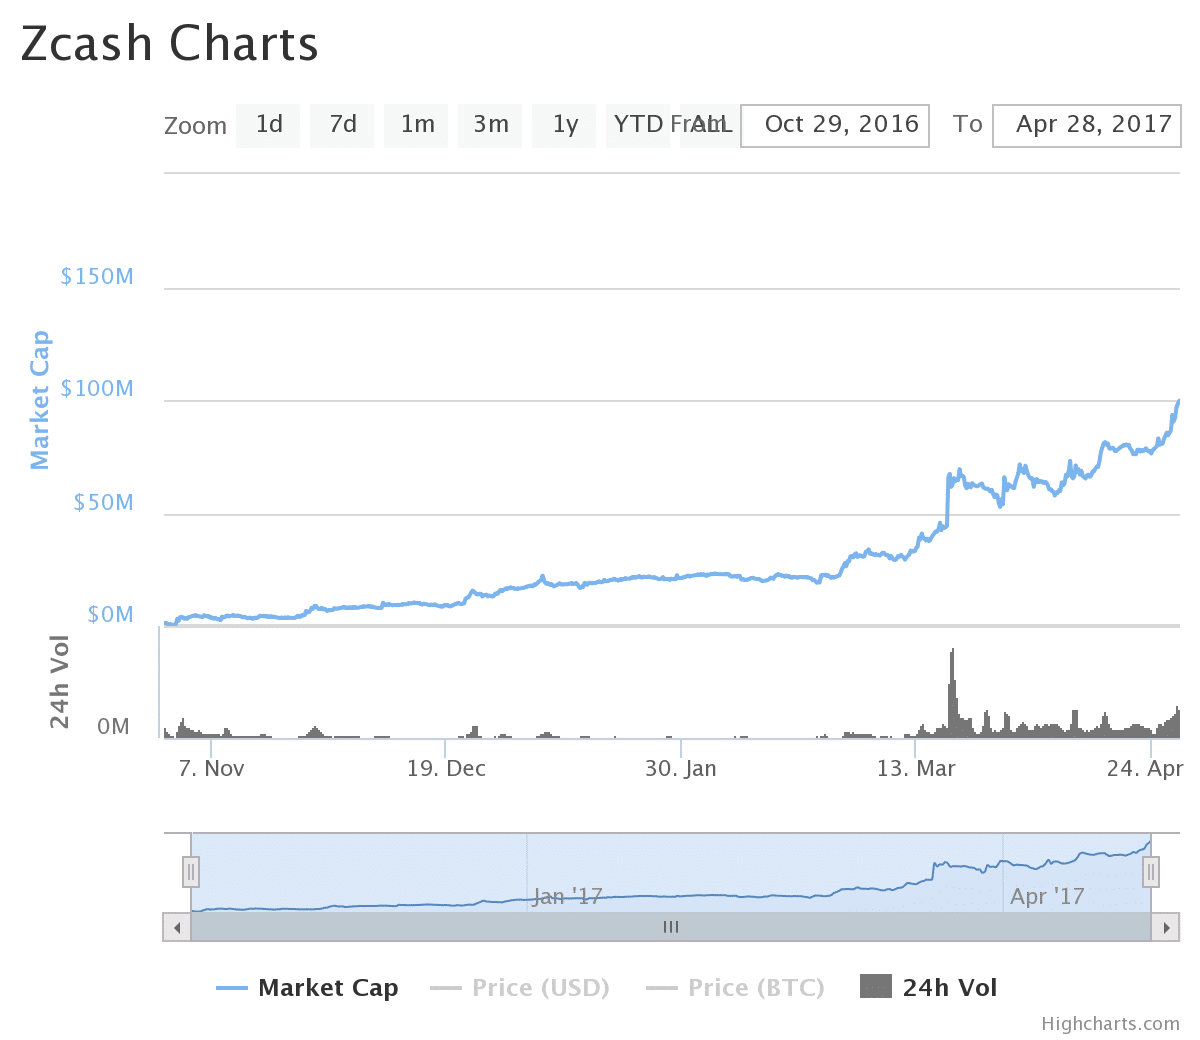 Chart of Zcash market cap history and growth to 100 million USD